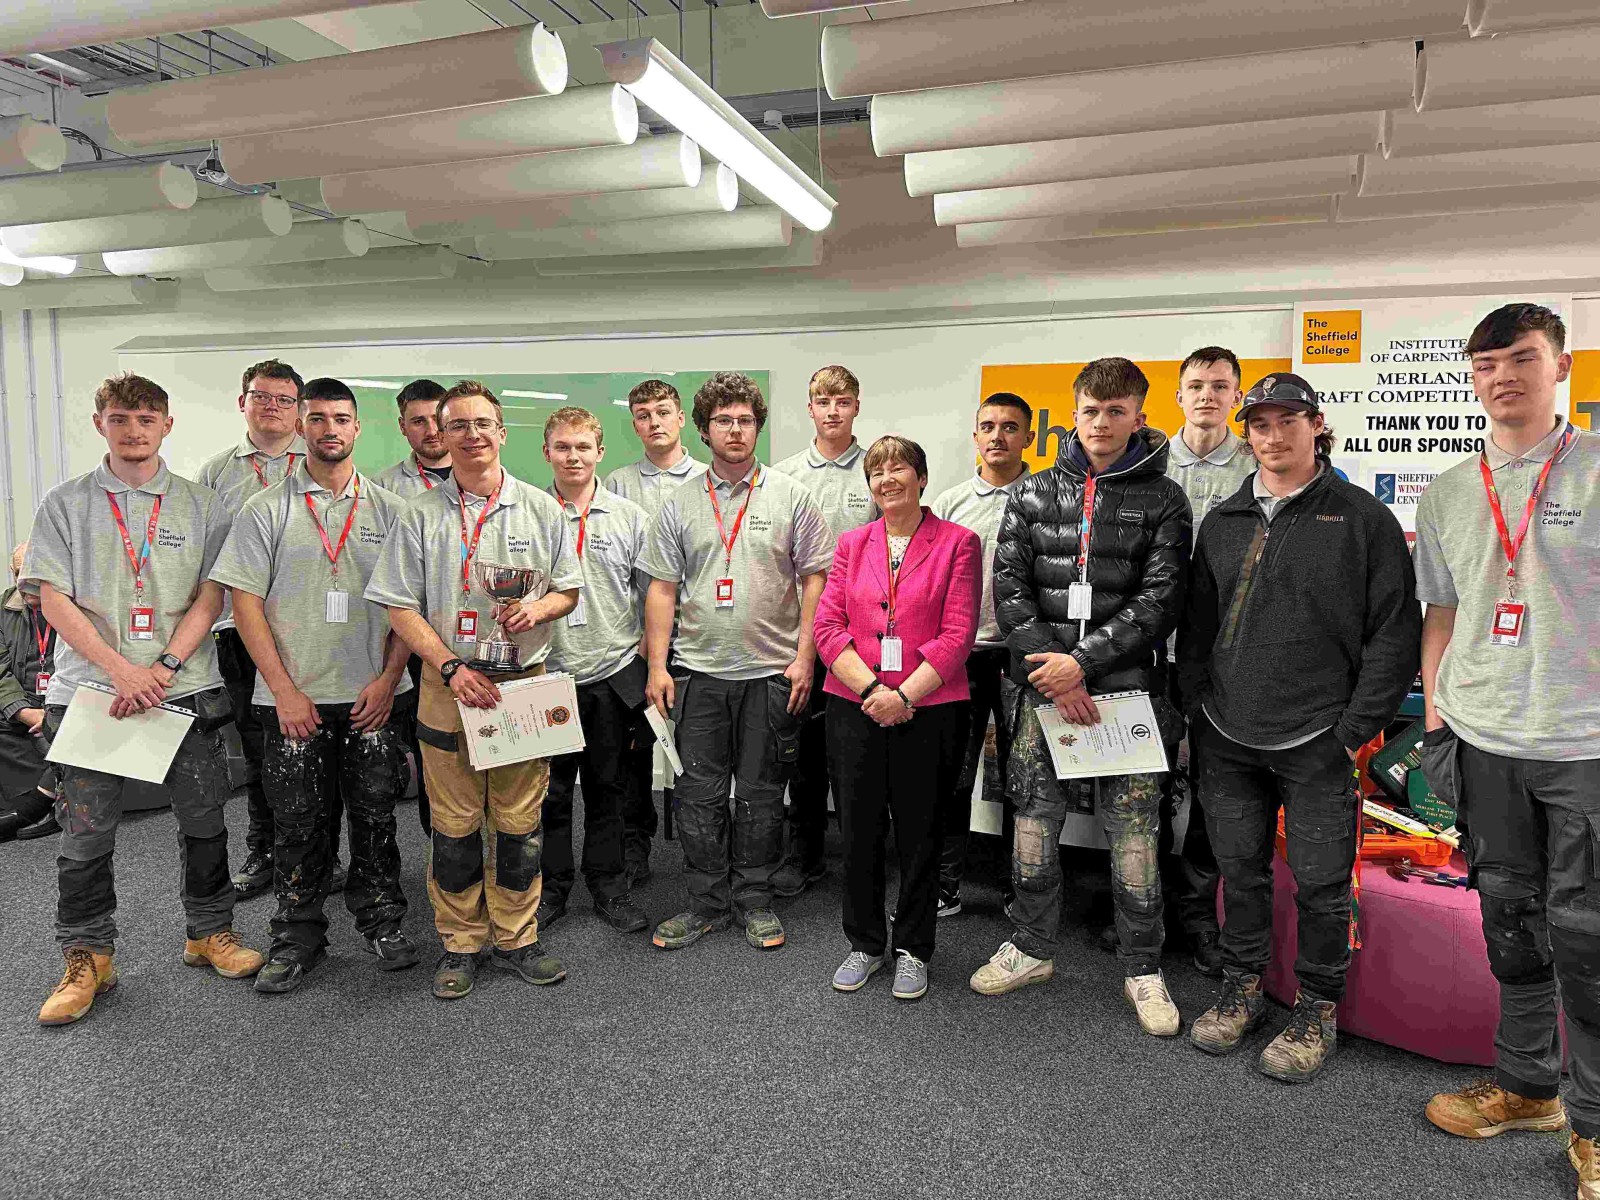 We hosted the 45th Institute of Carpenters, Merlane Trophy Competition  image